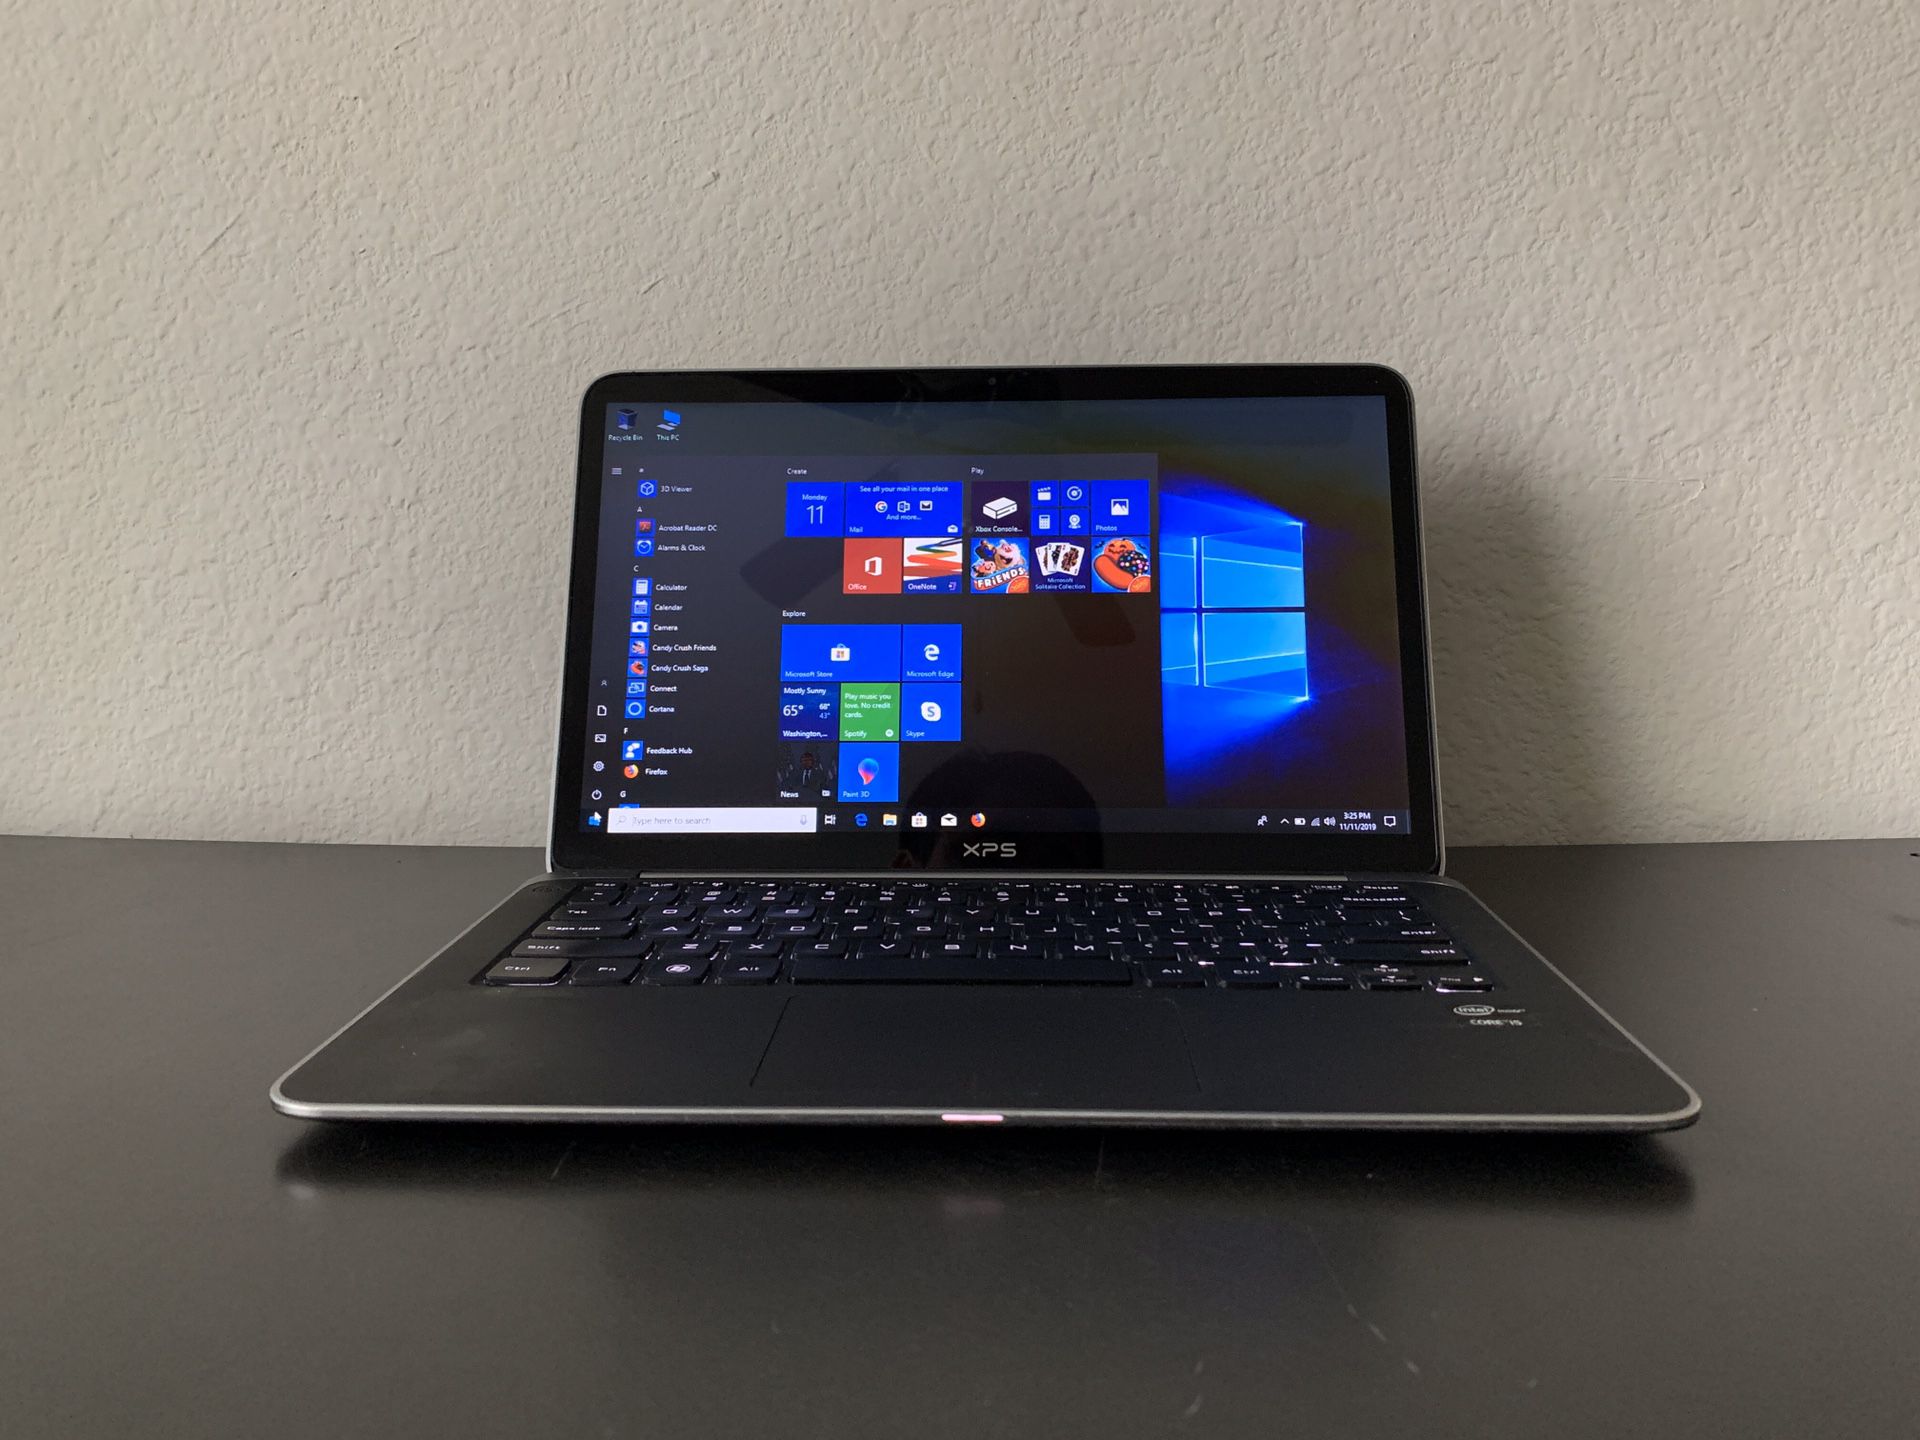 Laptop Dell XPS 13 inch Core i5 4GB 128GB PCIe SSD Windows 10 and Office 2019